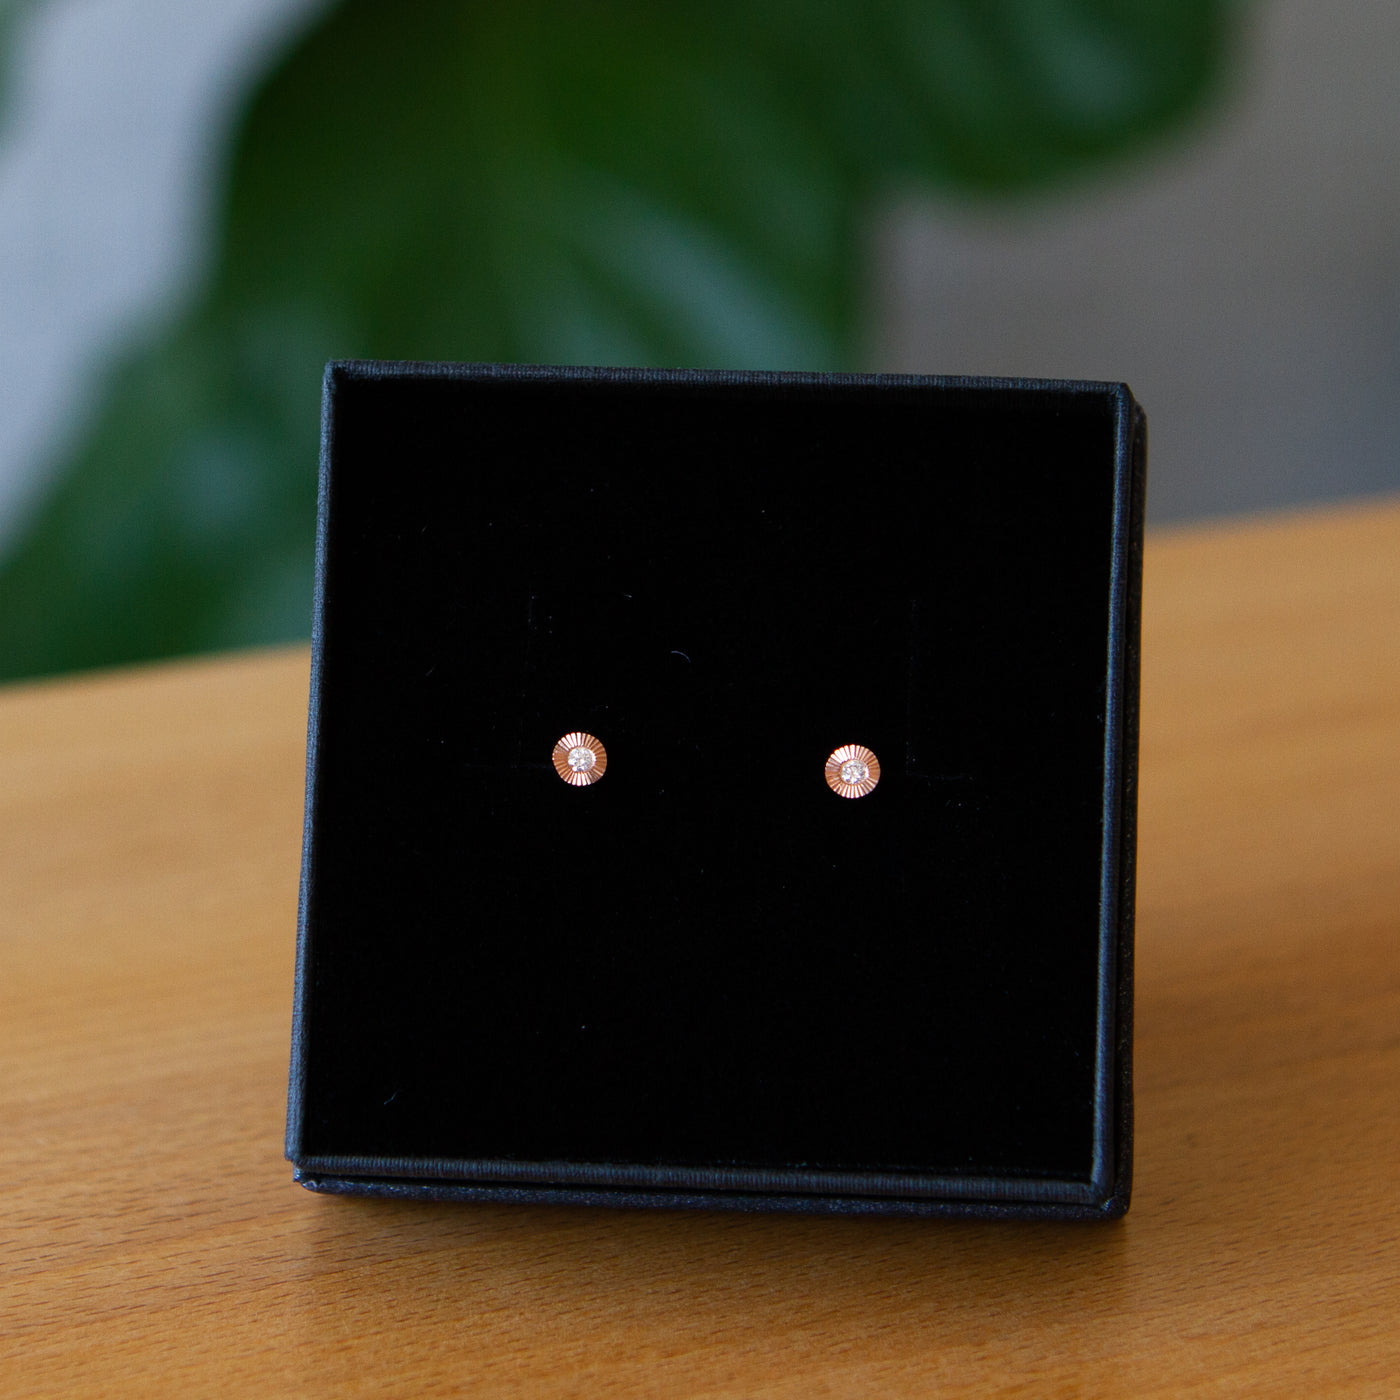 Small Aurora Diamond Stud Earring in Rose Gold packaged in a black jewelry box